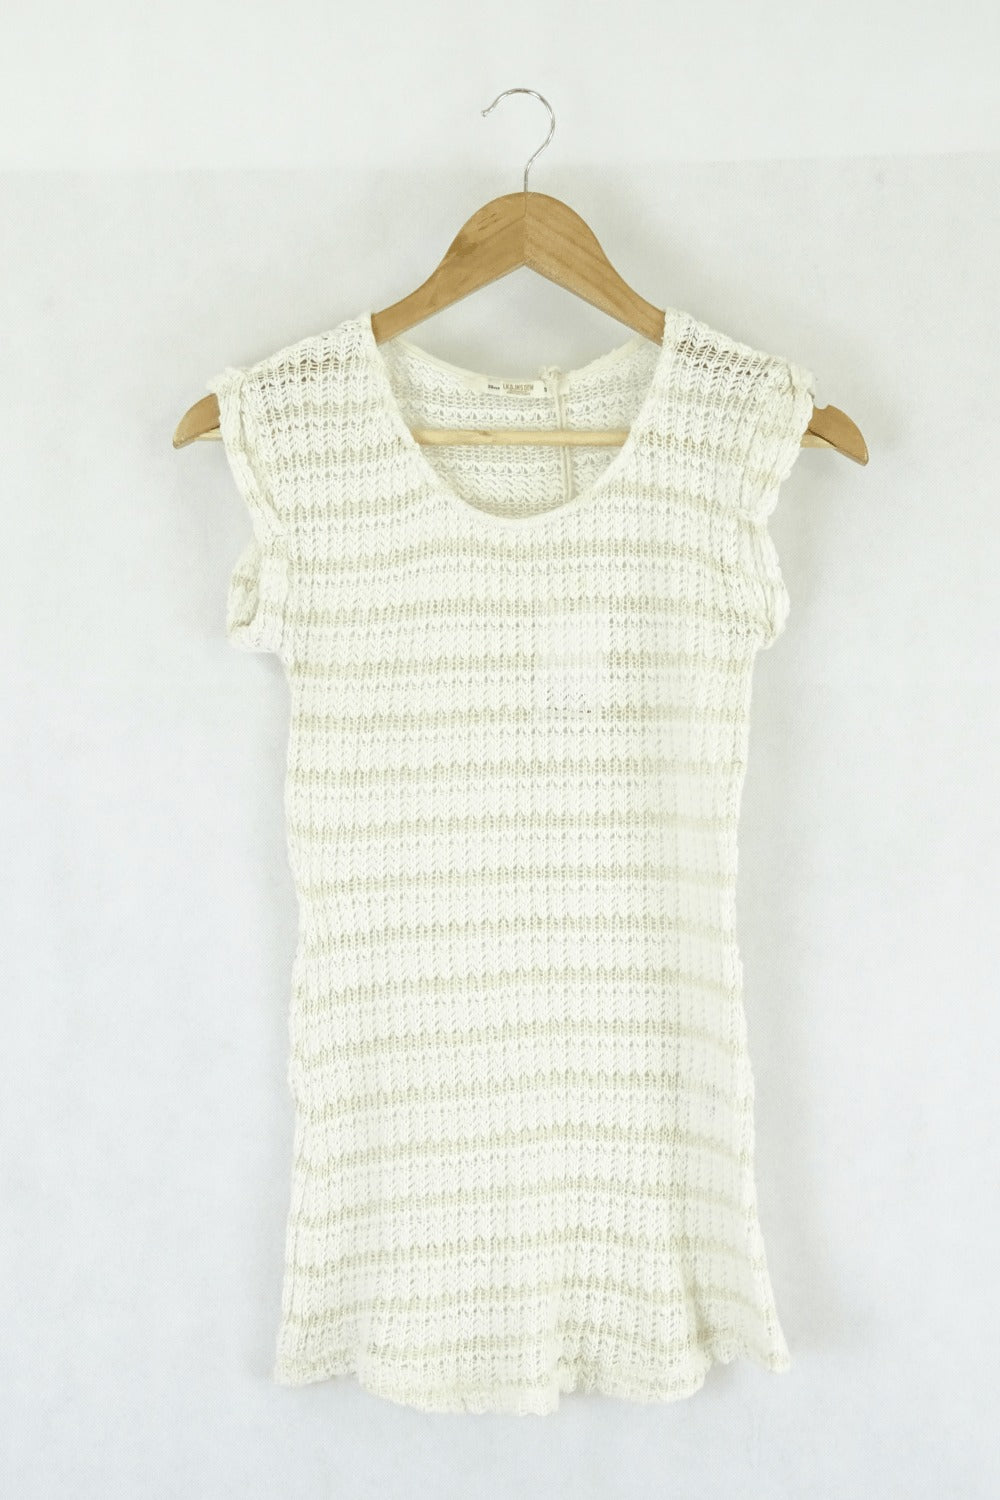 LK & JNS DEW knitted white and gold top S